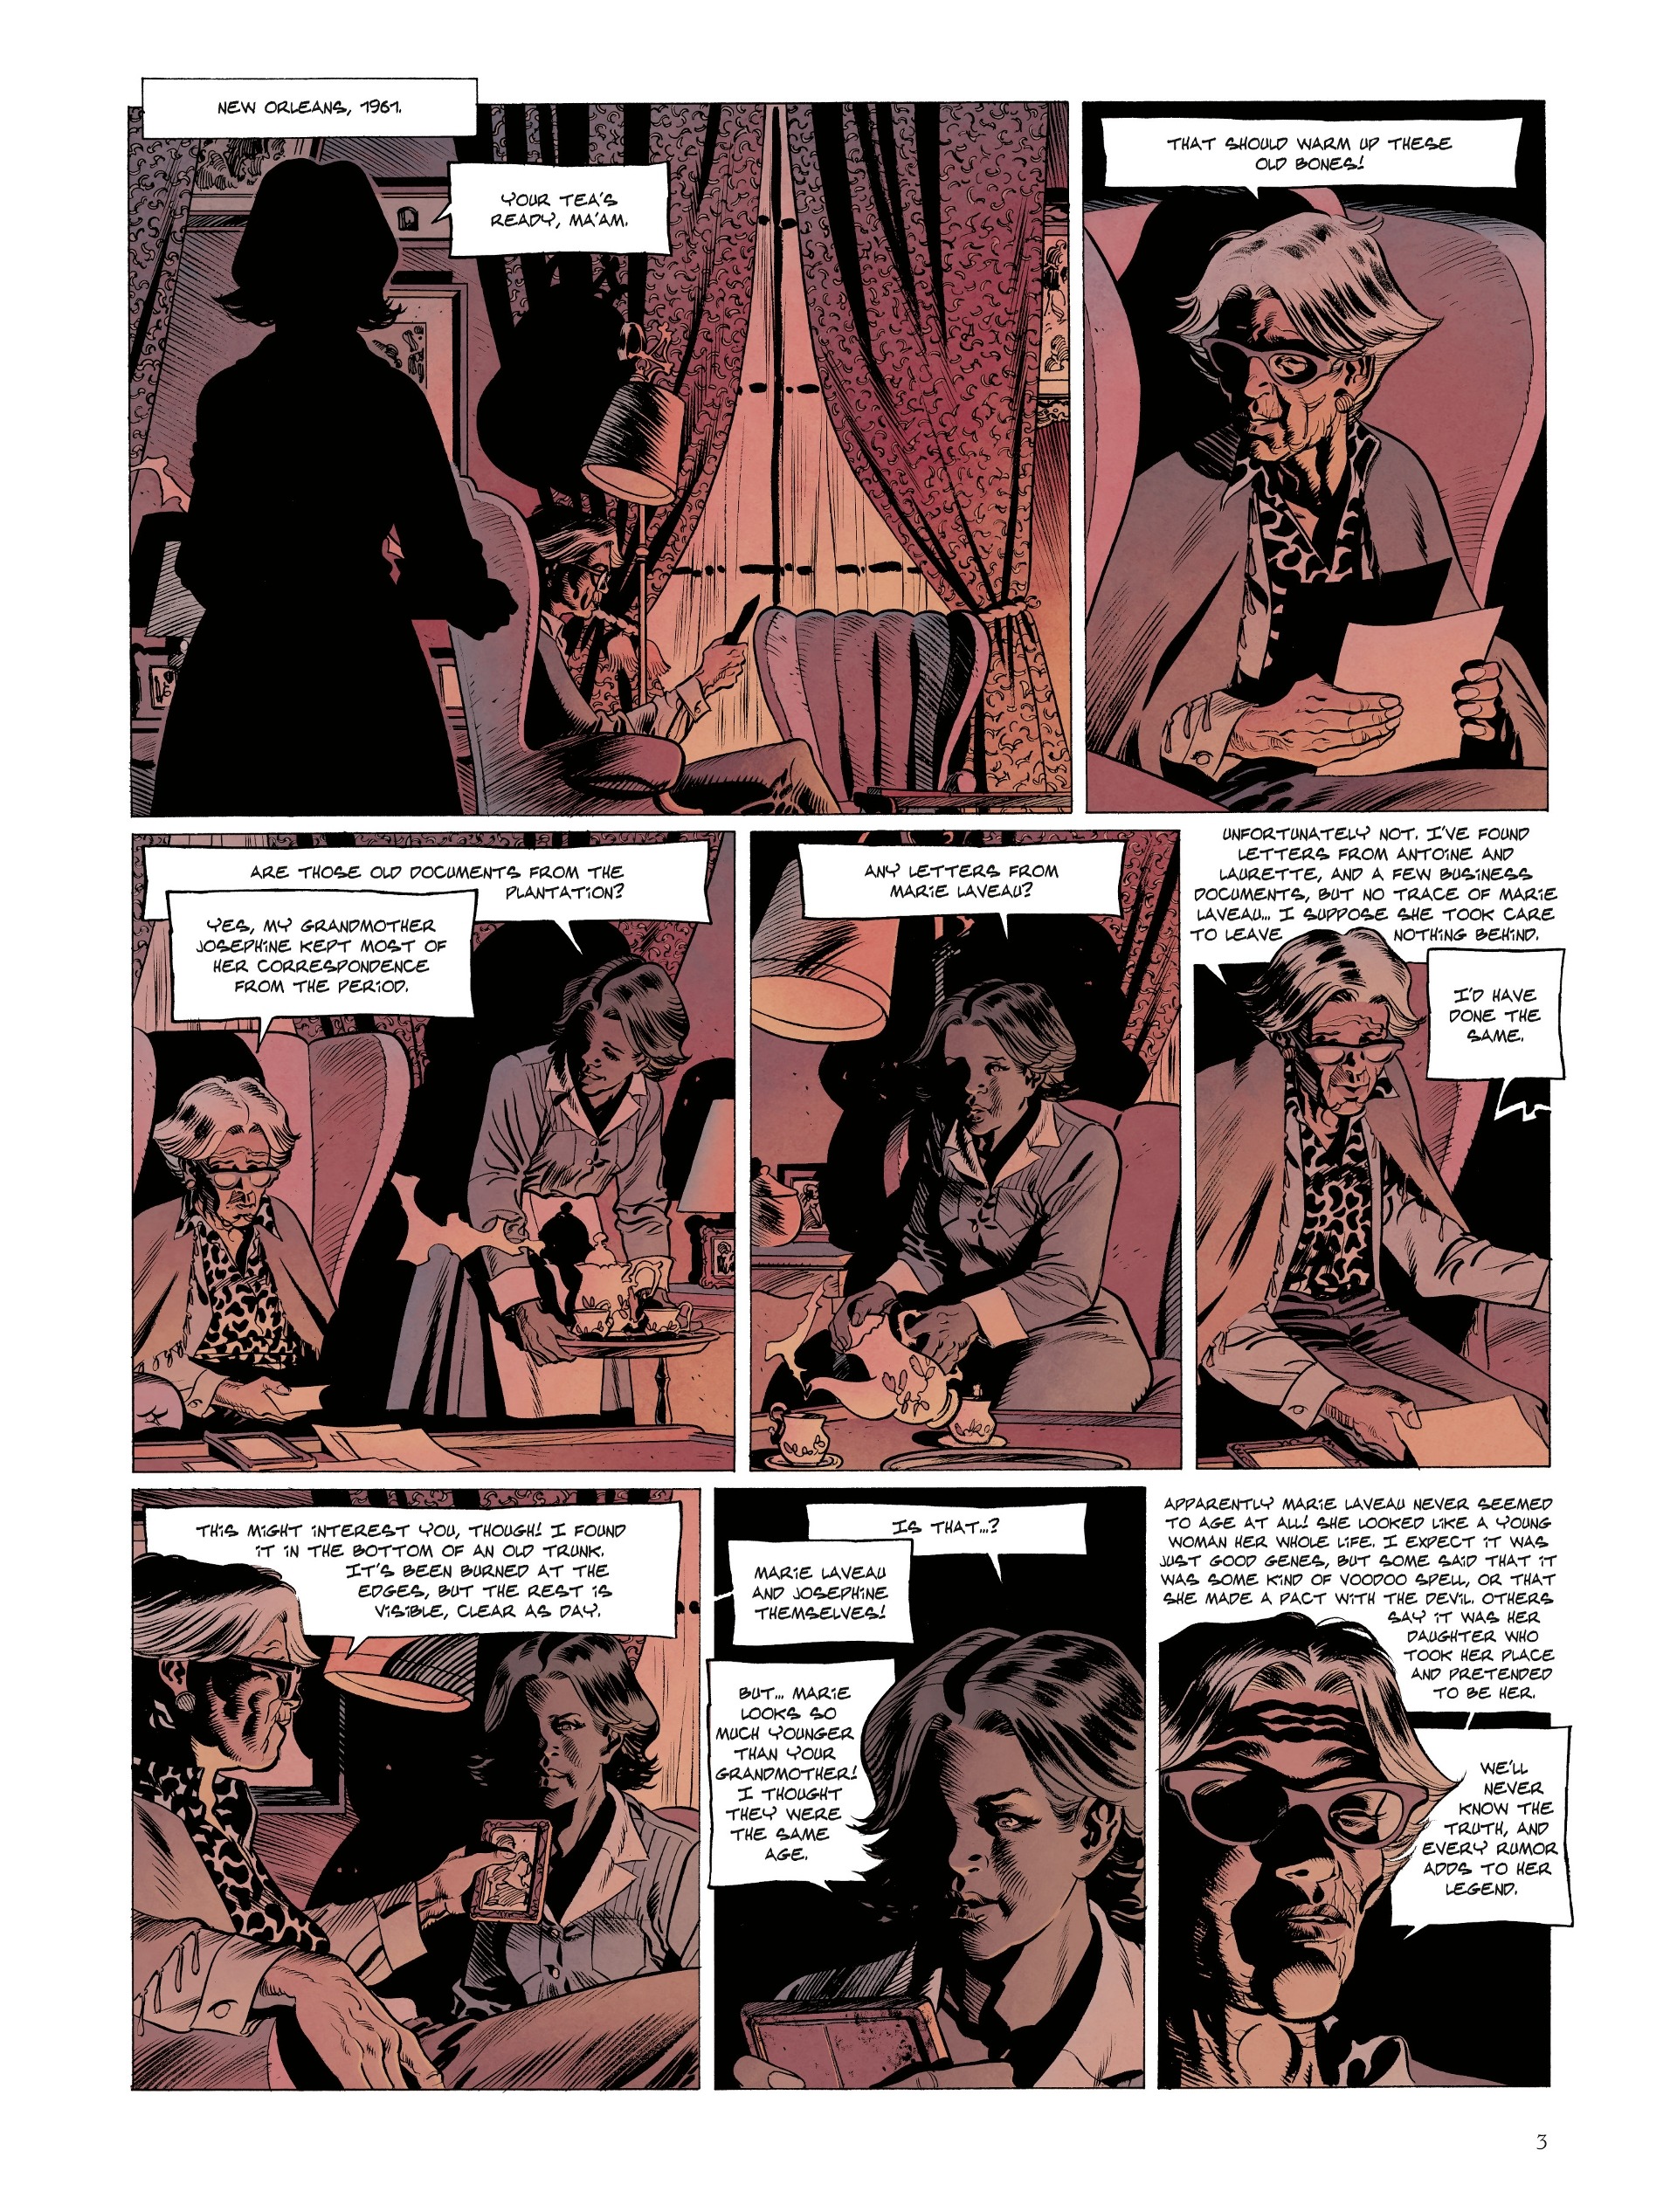 Louisiana: The Color of Blood (2019-): Chapter 2 - Page 5